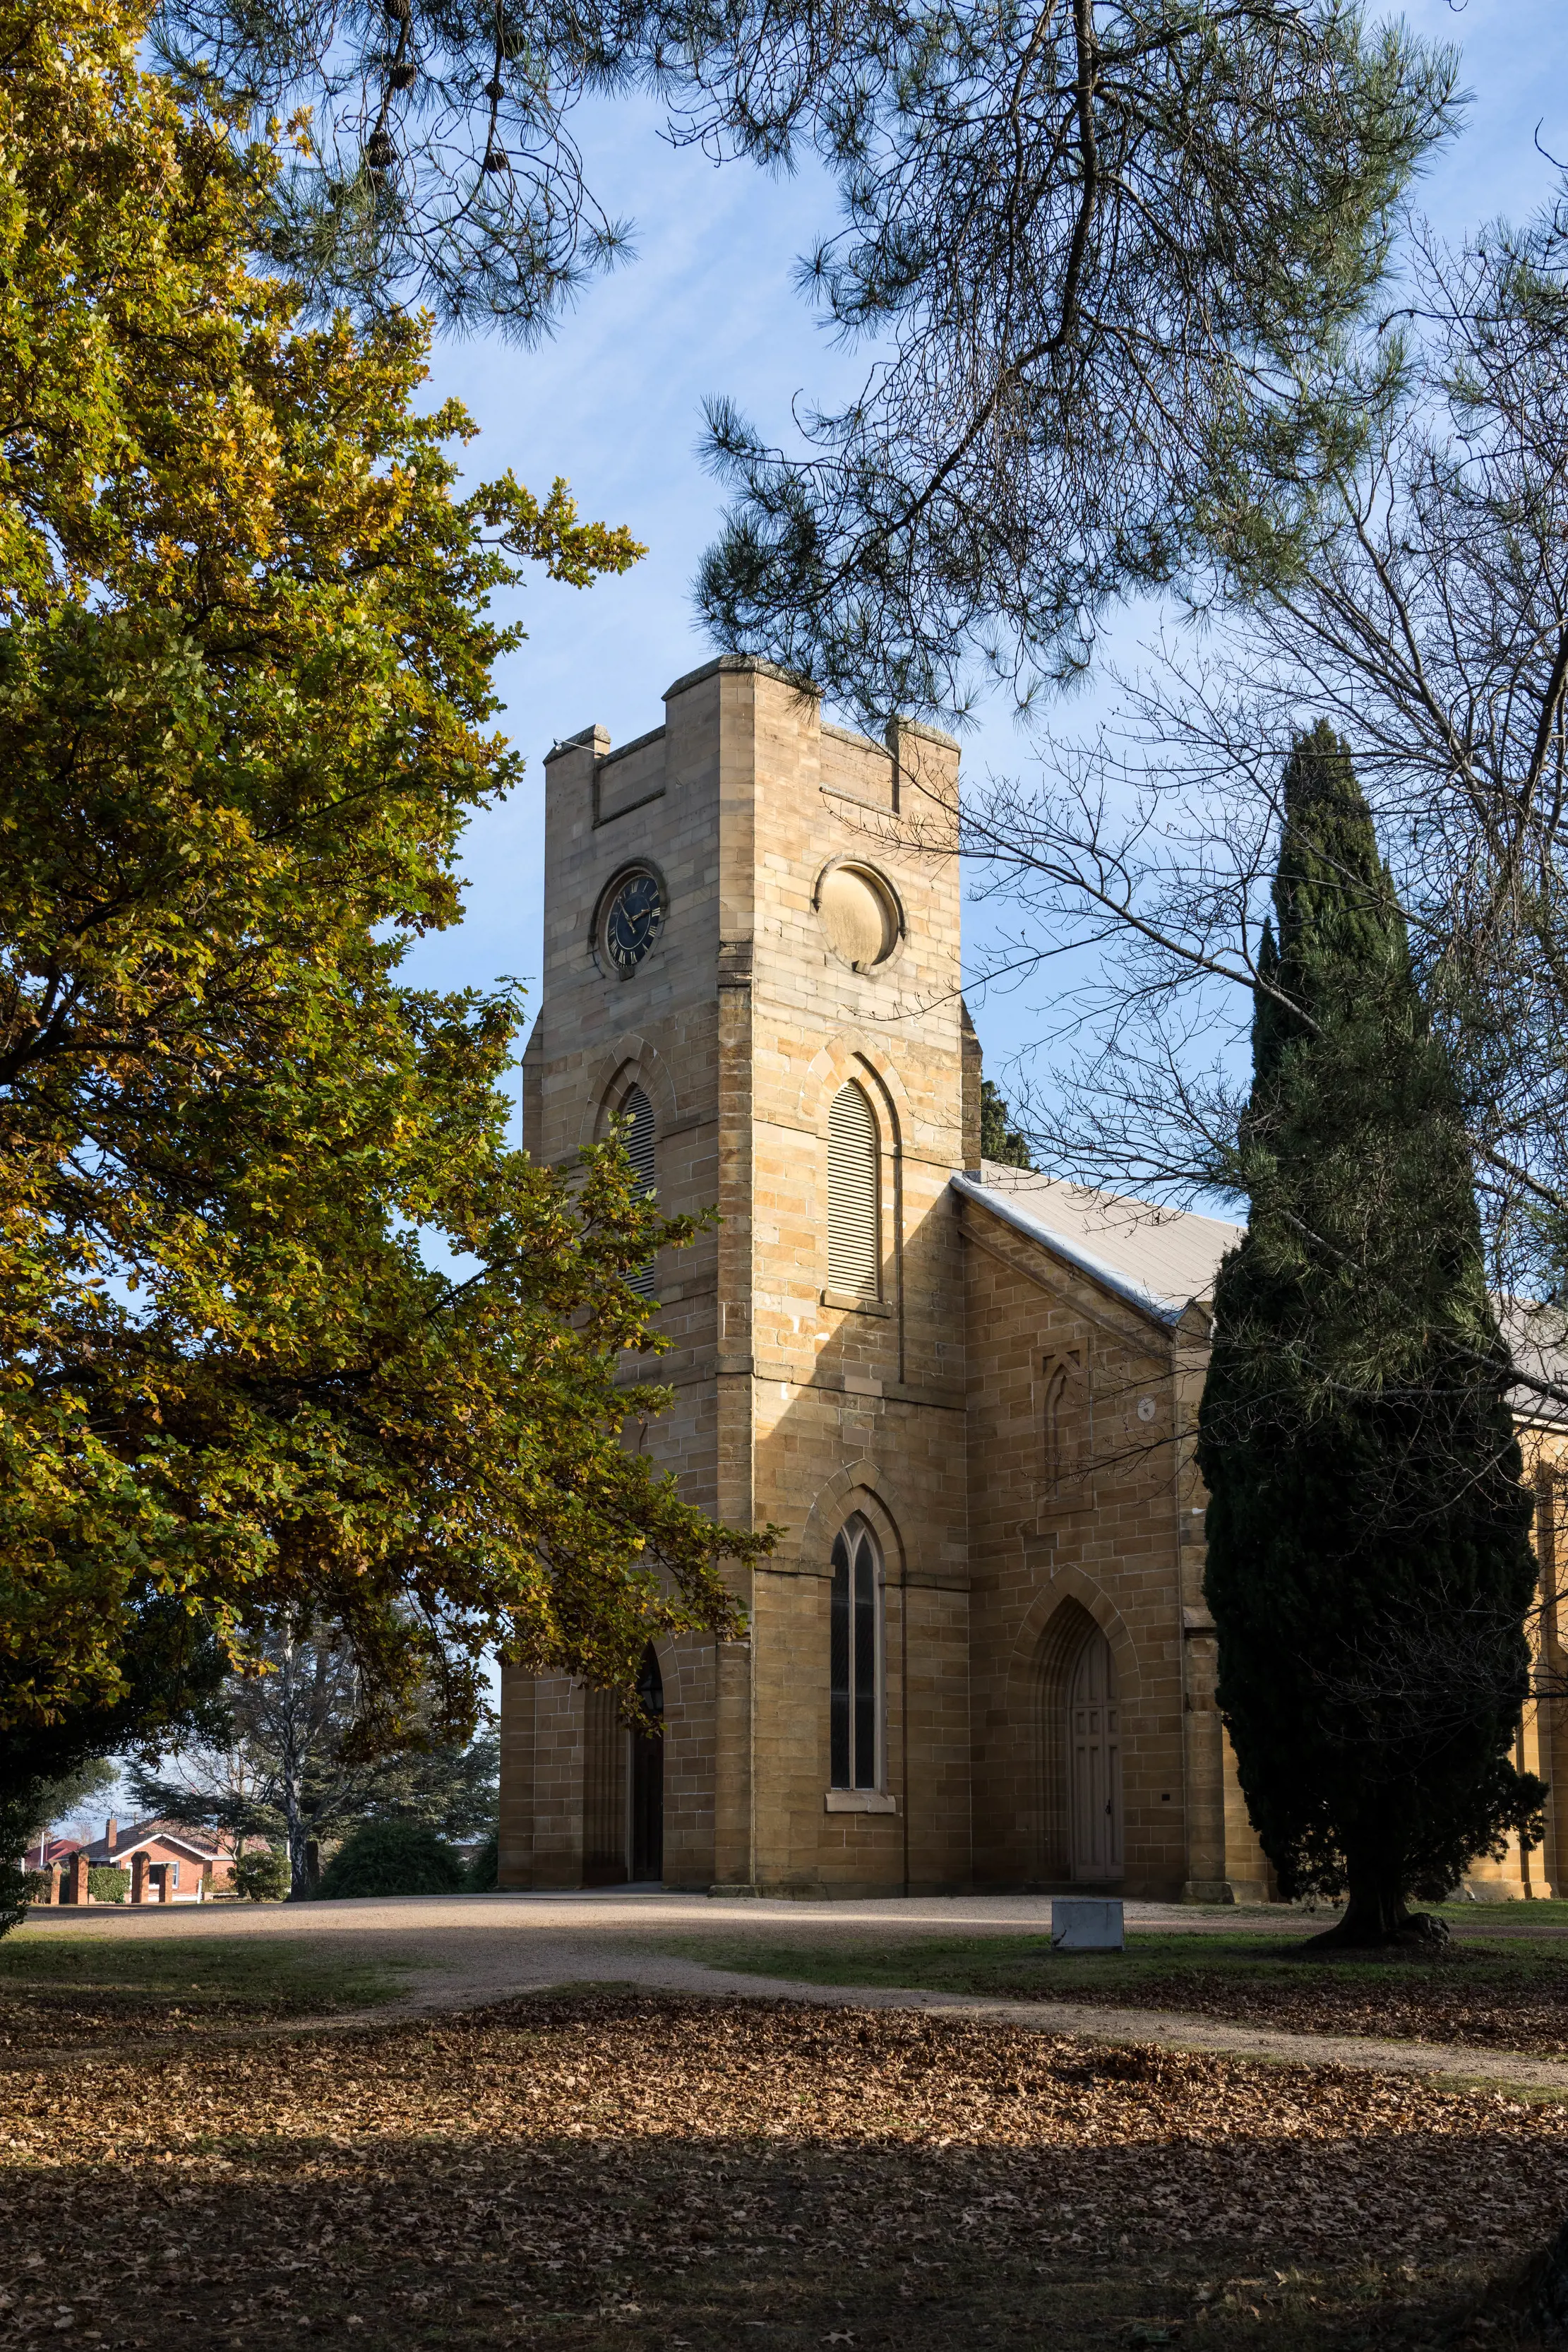 Exterior of Christ Church Anglican Church, Autumn leaves are on the floor in the foreground.